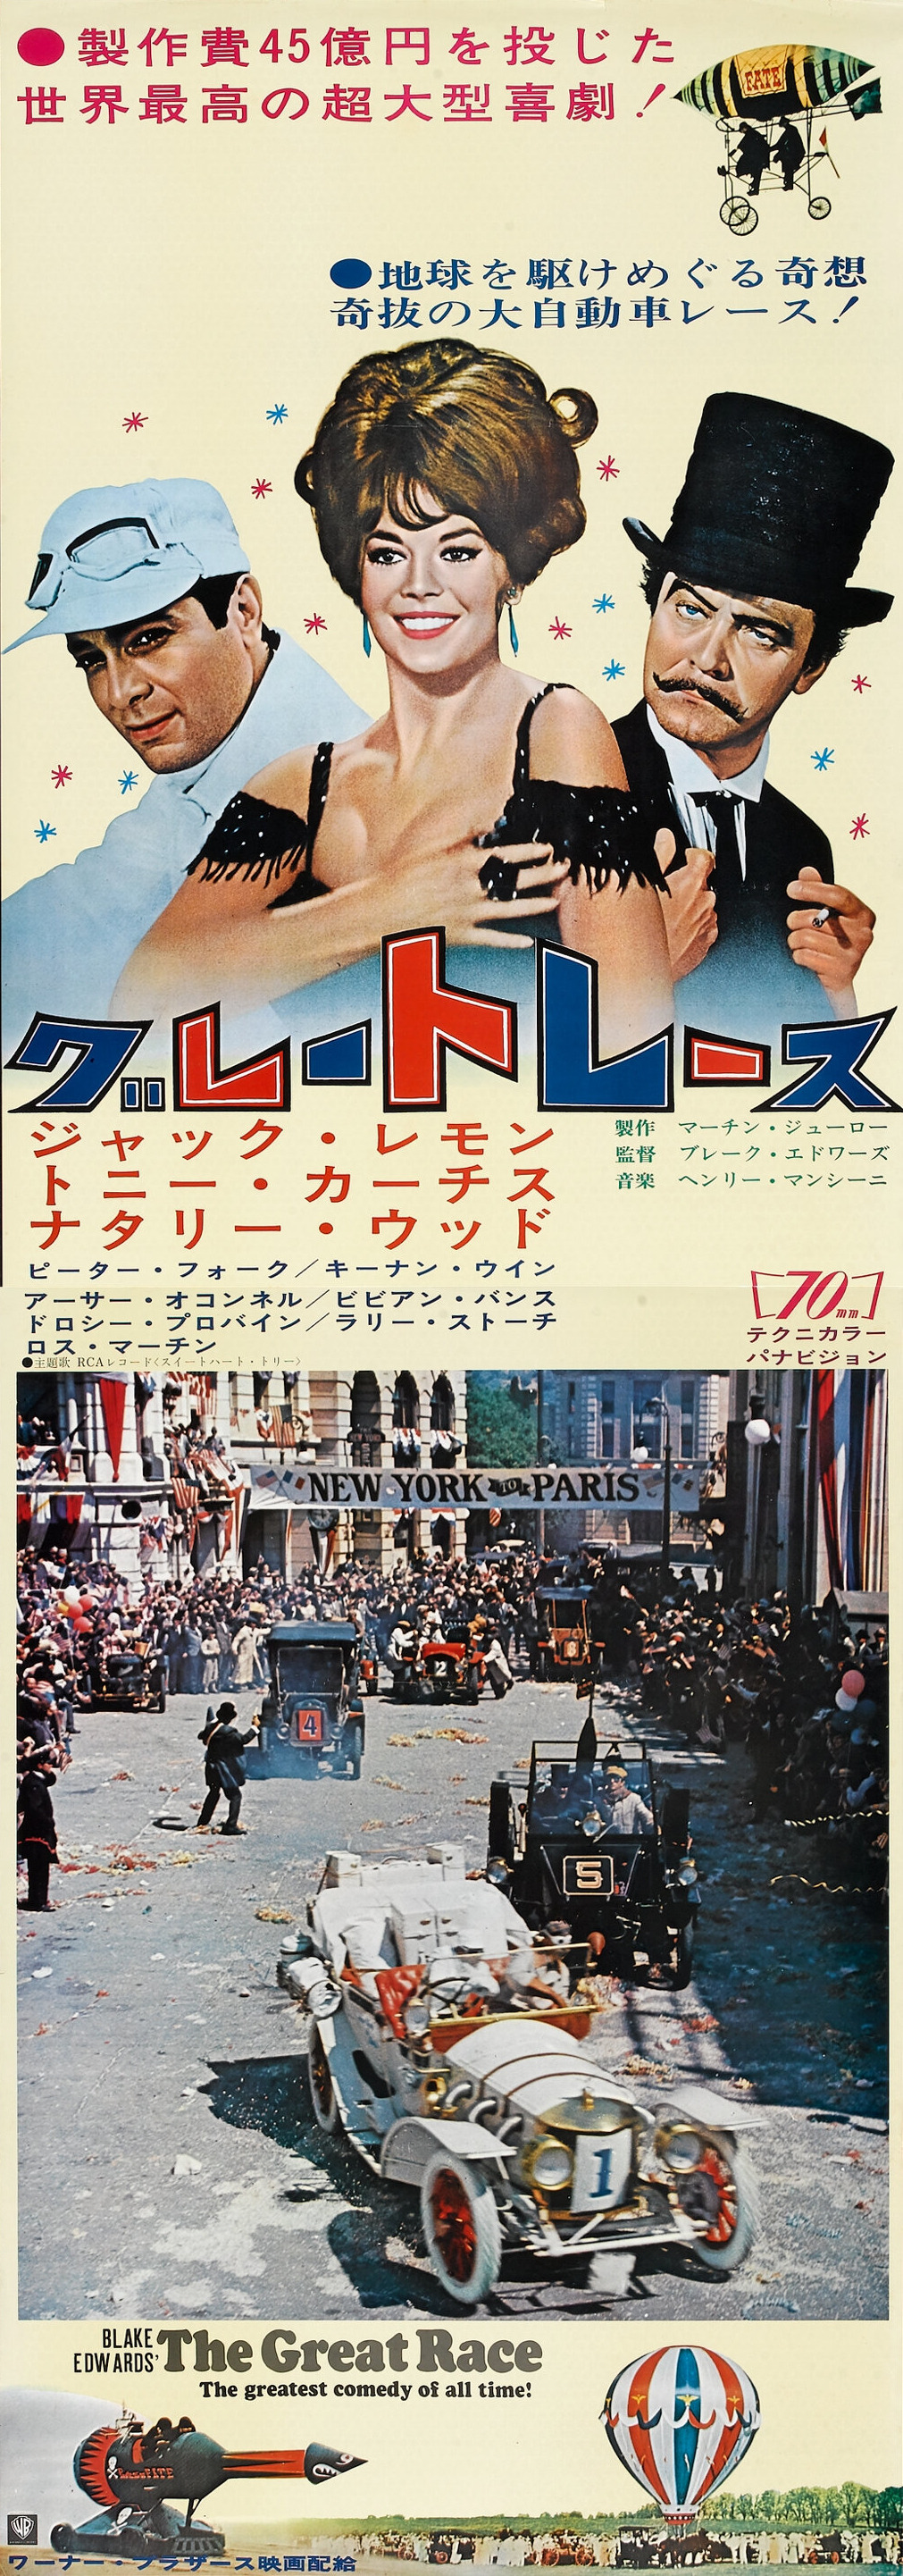 Mega Sized Movie Poster Image for The Great Race (#6 of 6)